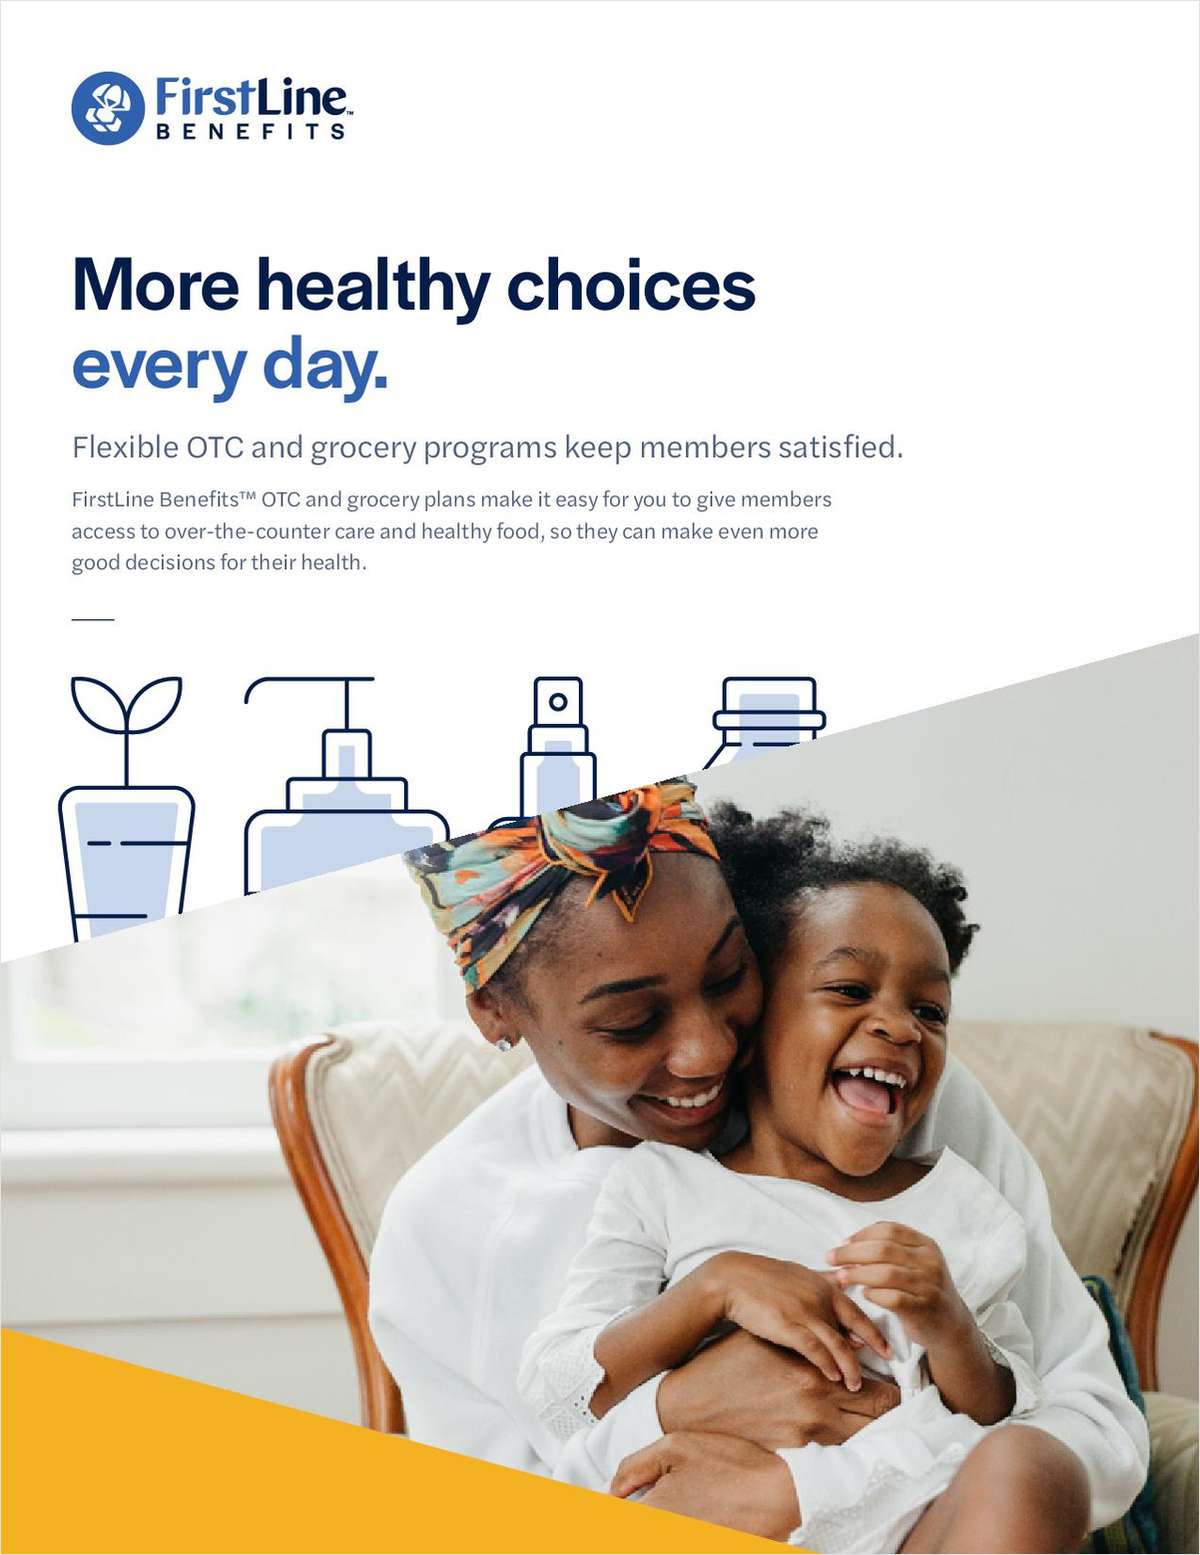 Flexible OTC and Grocery Benefits Keep Consumers Satisfied